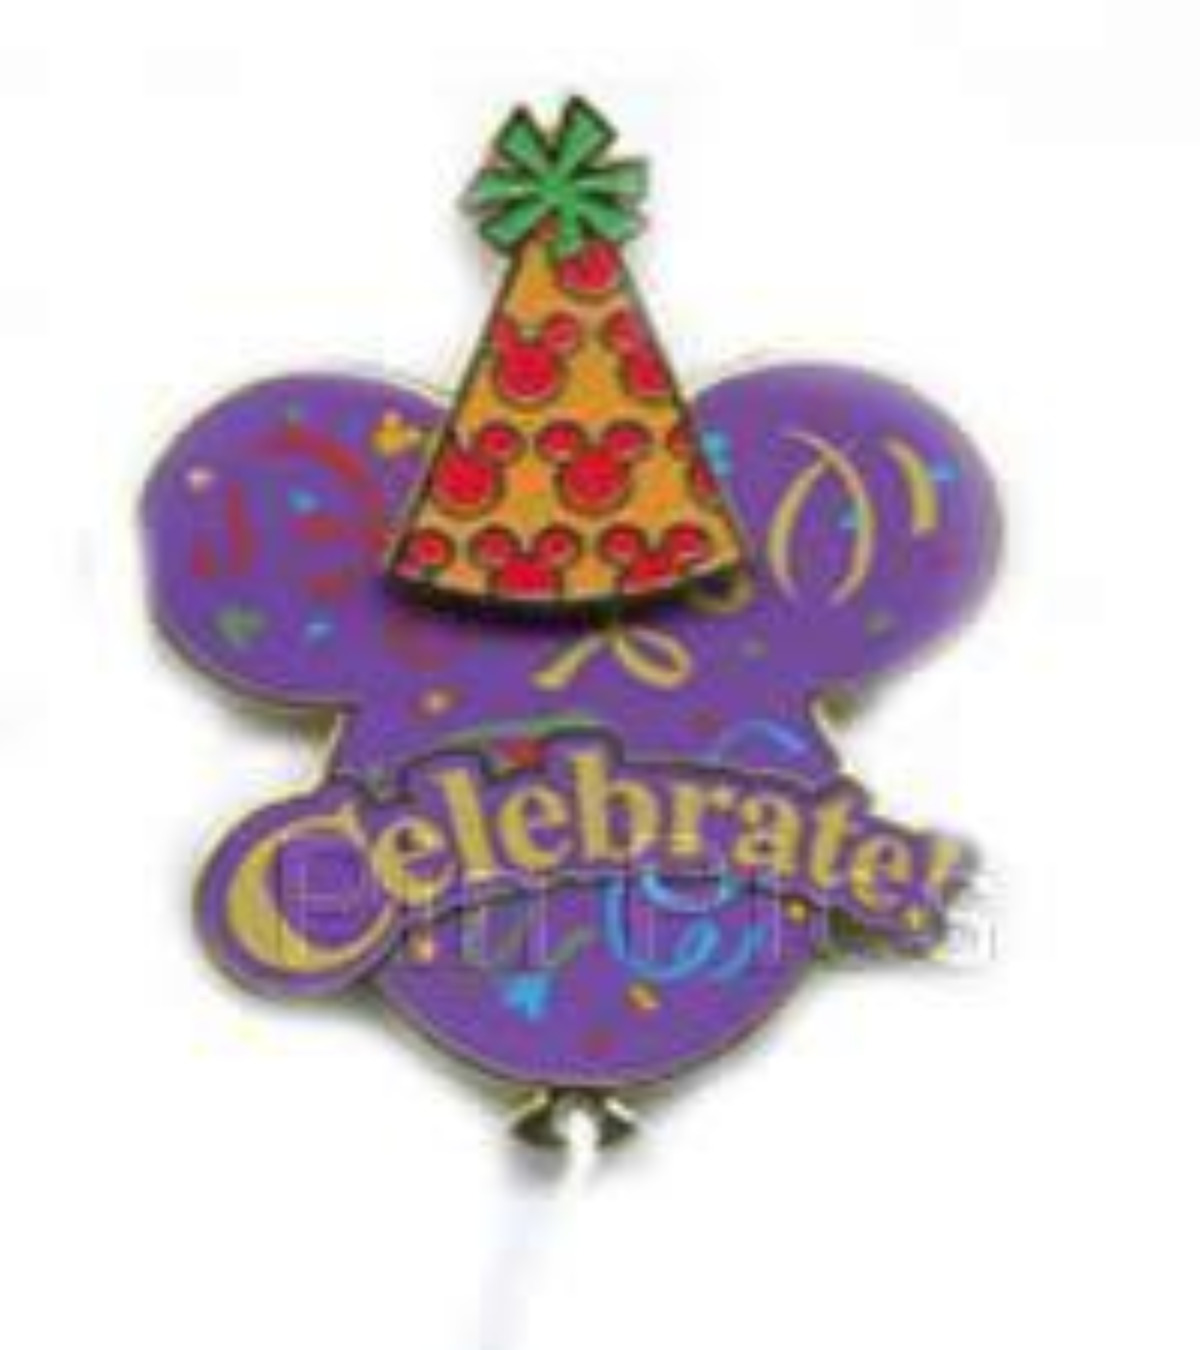 Rare Disney Pin 00043 Celebrate Everyday Balloon Artist Proof LE Only 25 made AP